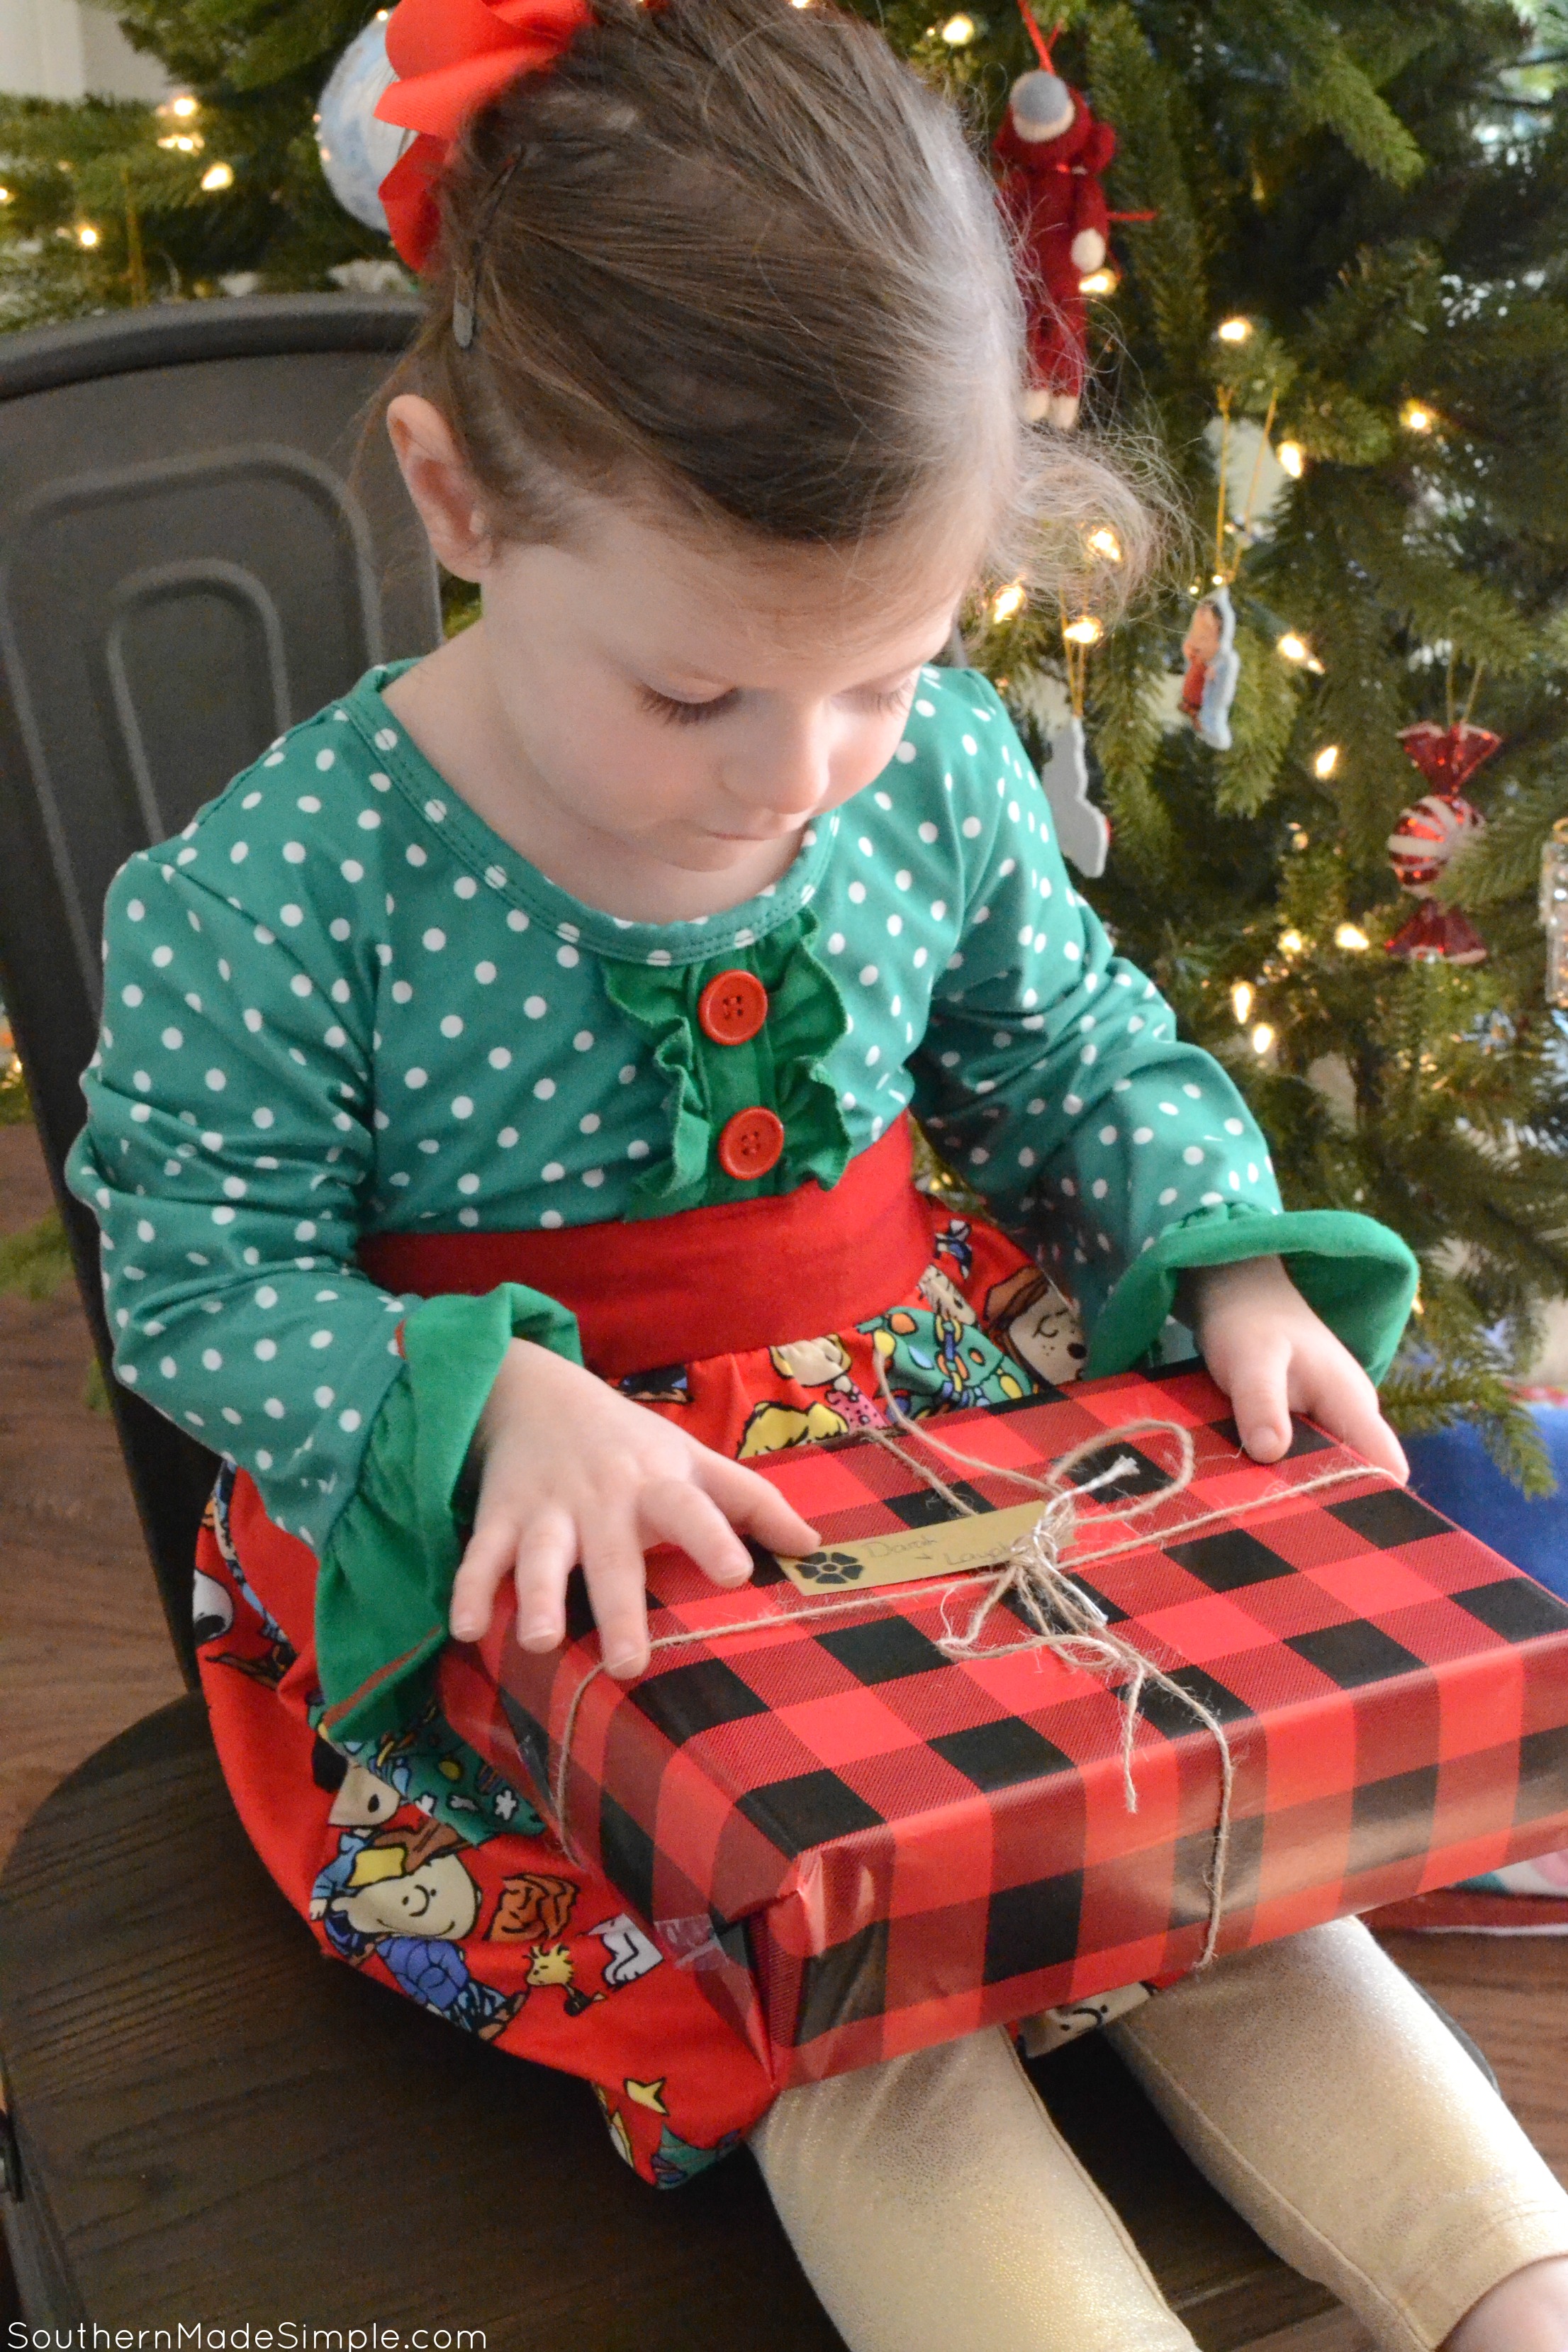 Continuing Holiday Traditions When Family is Far Away #HolidaysMadeEasy #TheUPSStore #ad